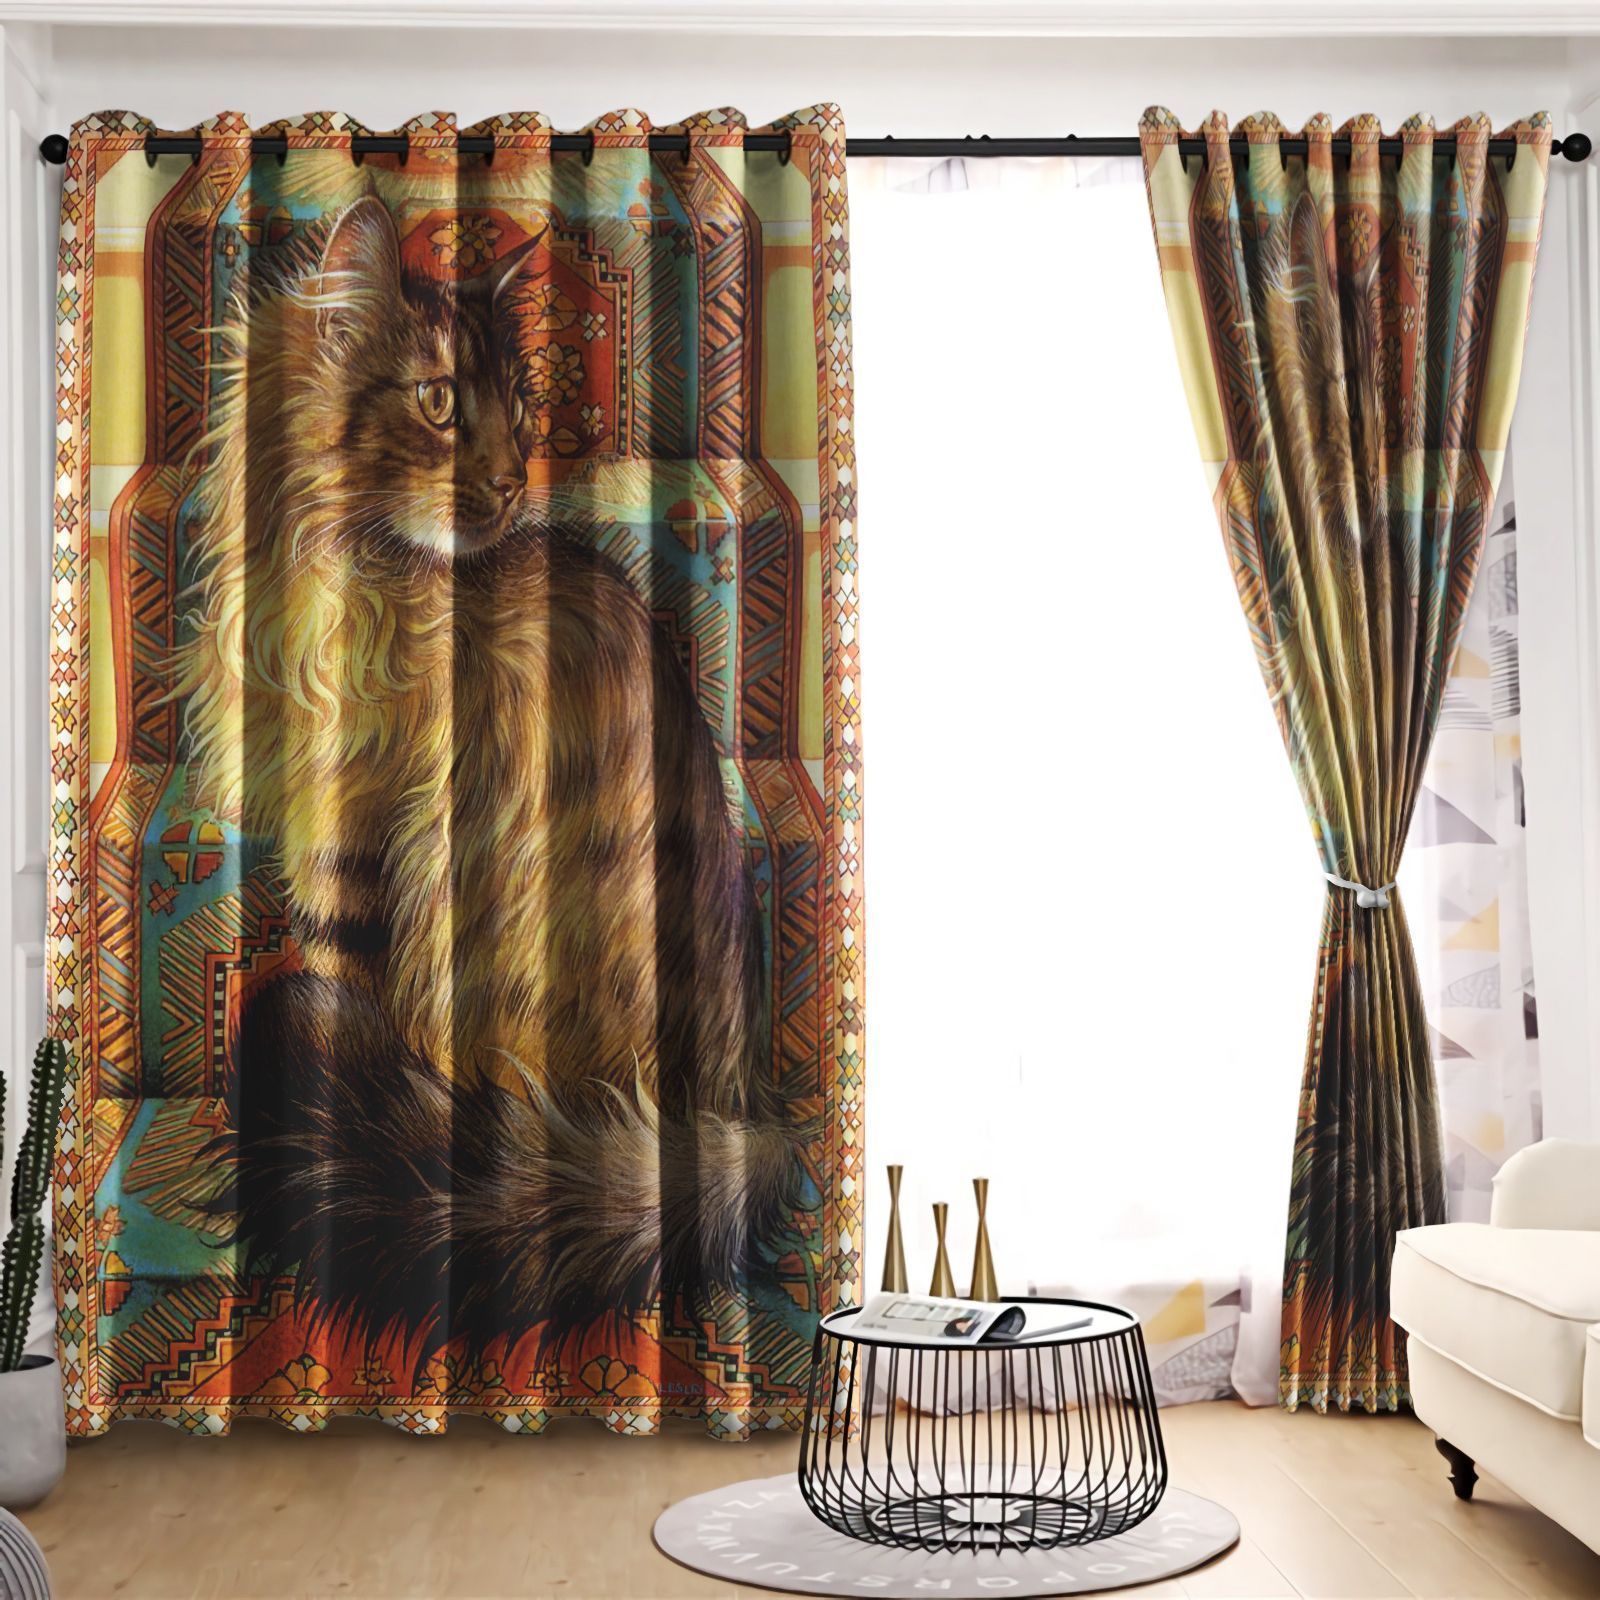 Noble Cat Printed Window Curtains Home Decor